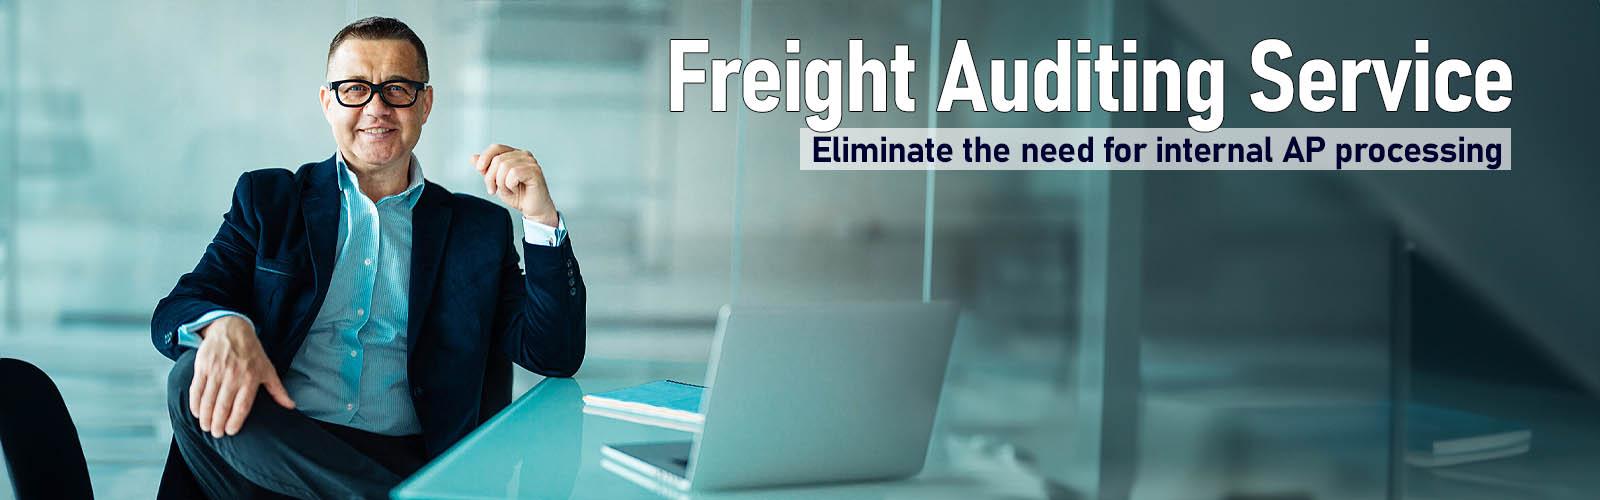 Freight Auditing Services